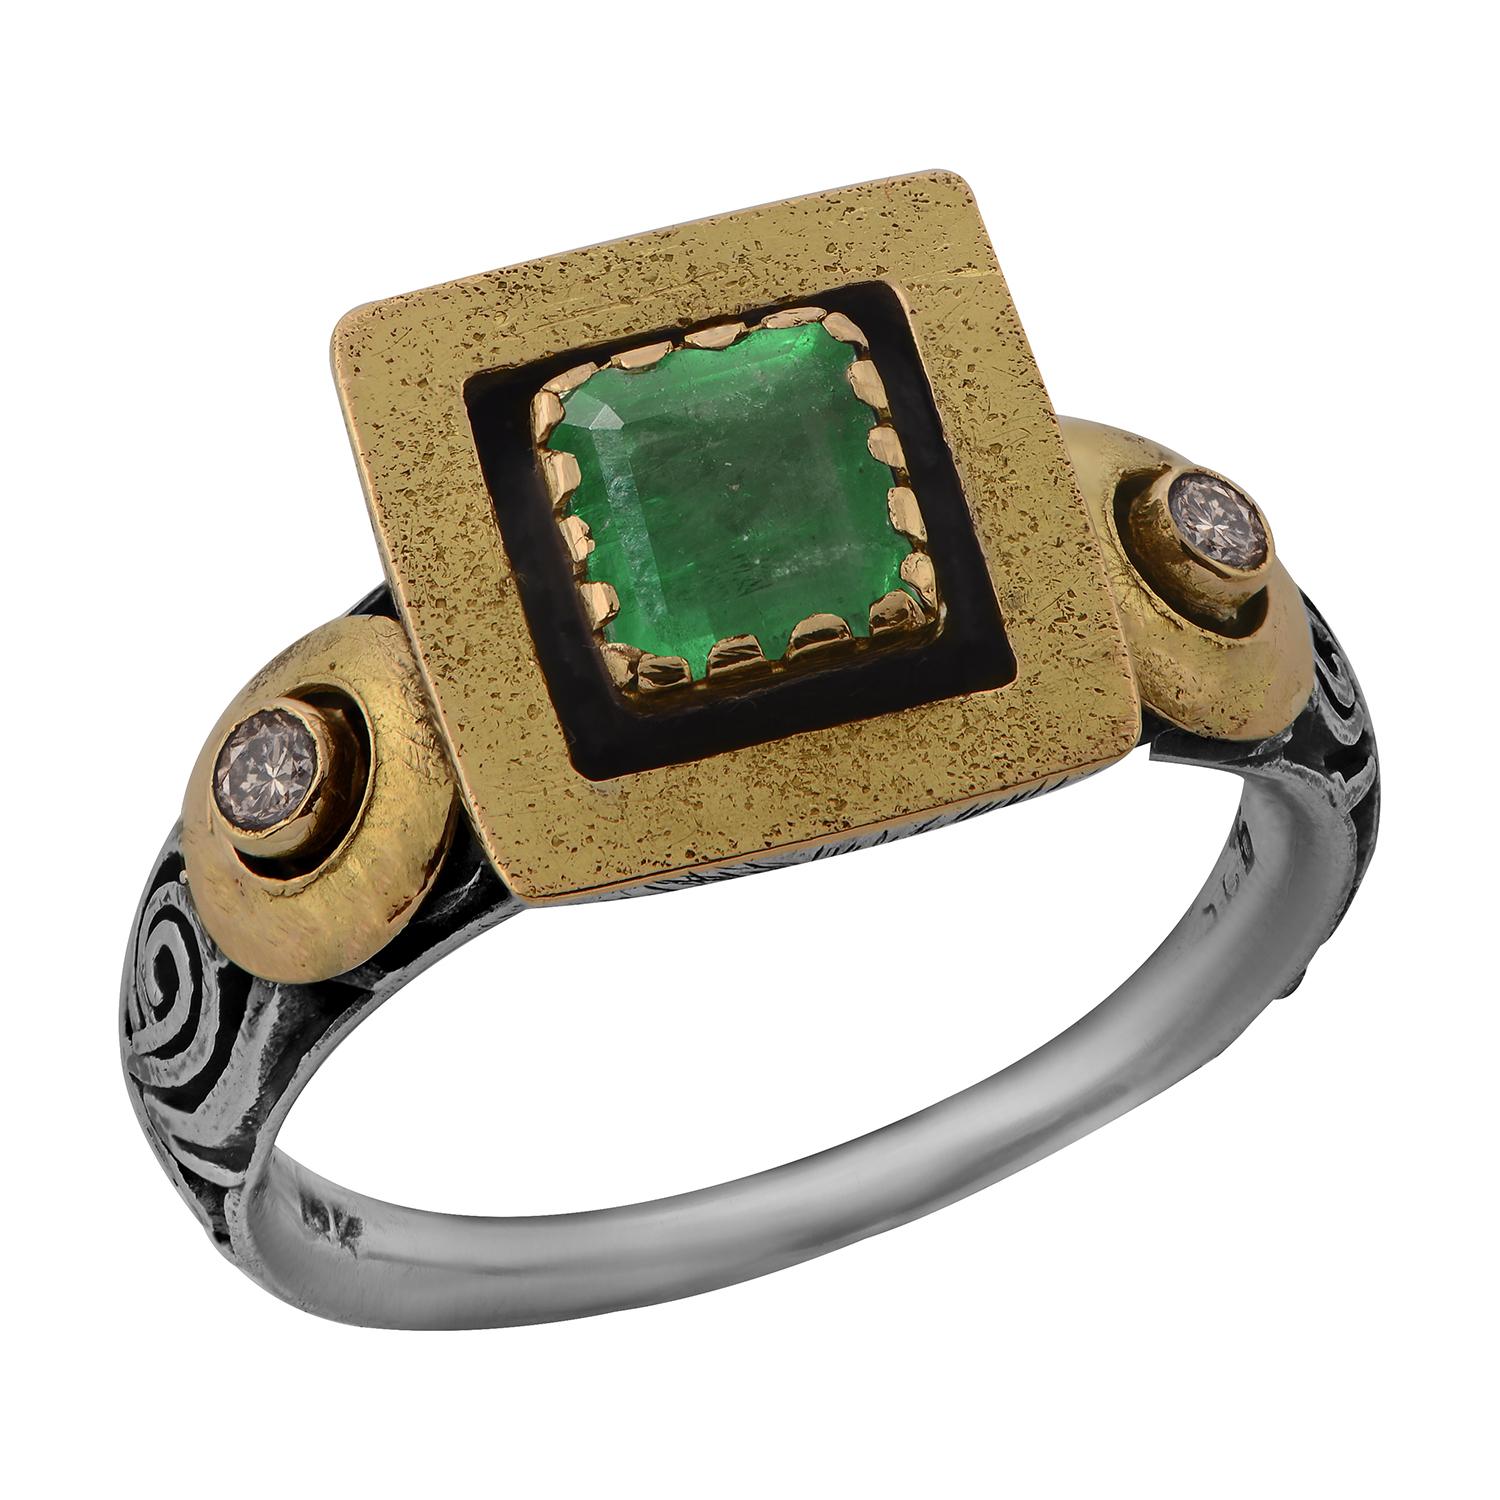 This lovely square-shaped emerald and diamond dress ring is one-of-a-kind and has been handmade in our workshops. The emerald and diamonds of this striking statement piece are set in 18k gold. The shank has hand-engraved geometric patterns for a